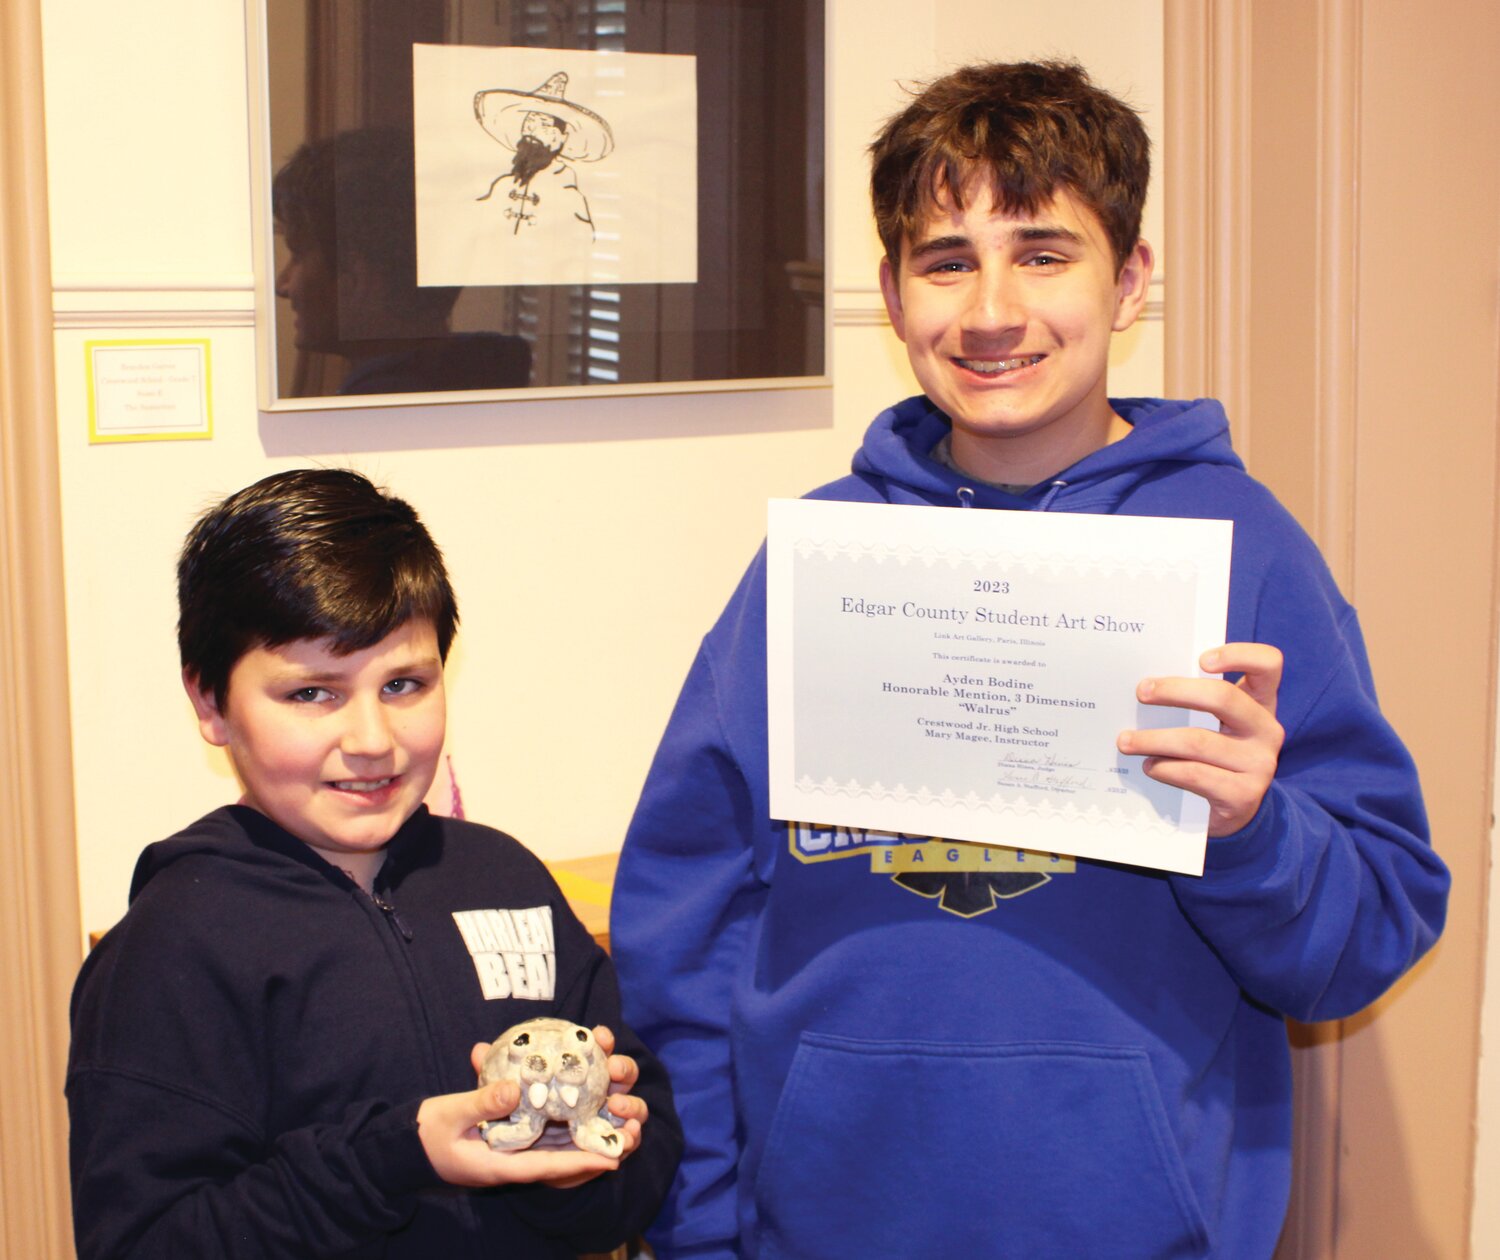 Ayden Bodine, right, received an honorable mention for his ceramic sculpture at Link Art Gallery’s Edgar County Student Art Show. He encouraged his little  brother, Liam, to help by naming the finished piece, and the younger boy is holding “Wally, the Walrus.”